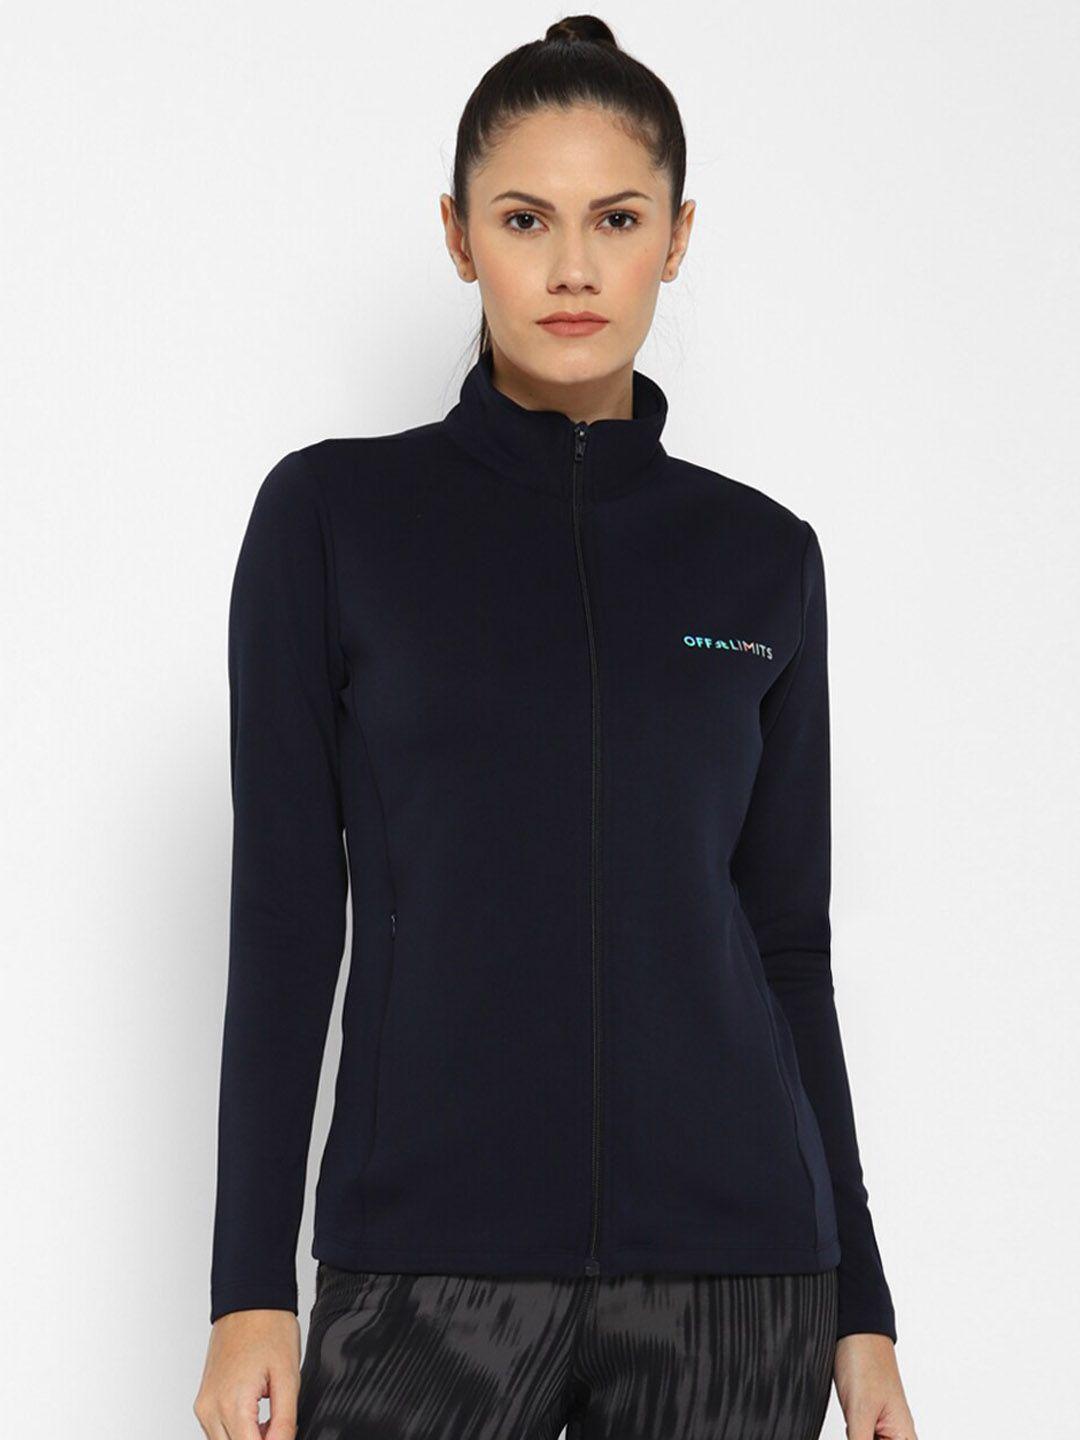 off limits women navy blue lightweight training or gym sporty jacket